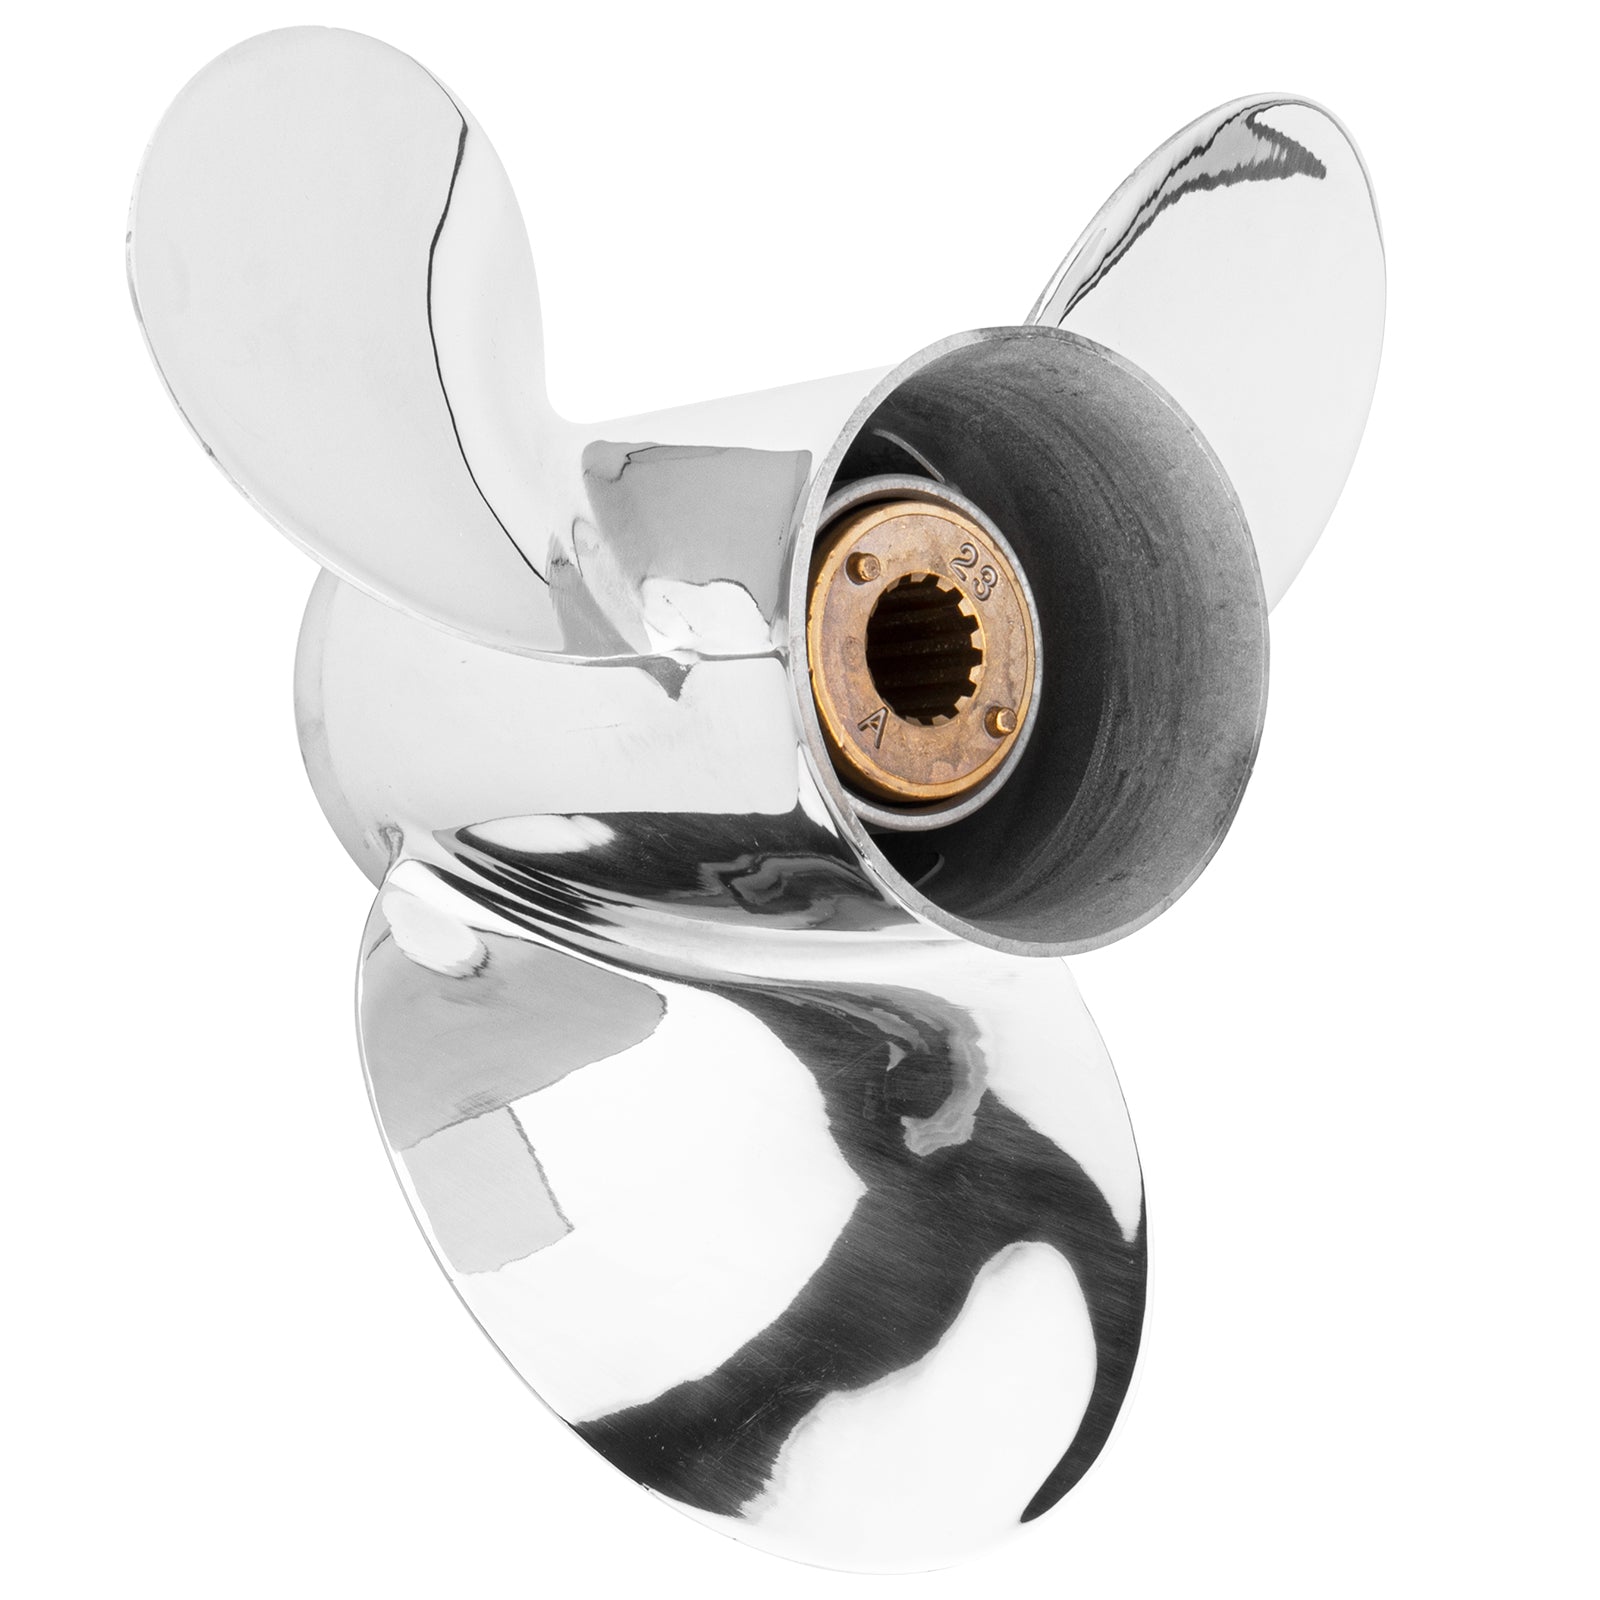 10 3/8 x 14 Stainless Steel Propeller for Mercury Outboard 25-70 HP ,48-855860A46,13 Spline Tooth,RH